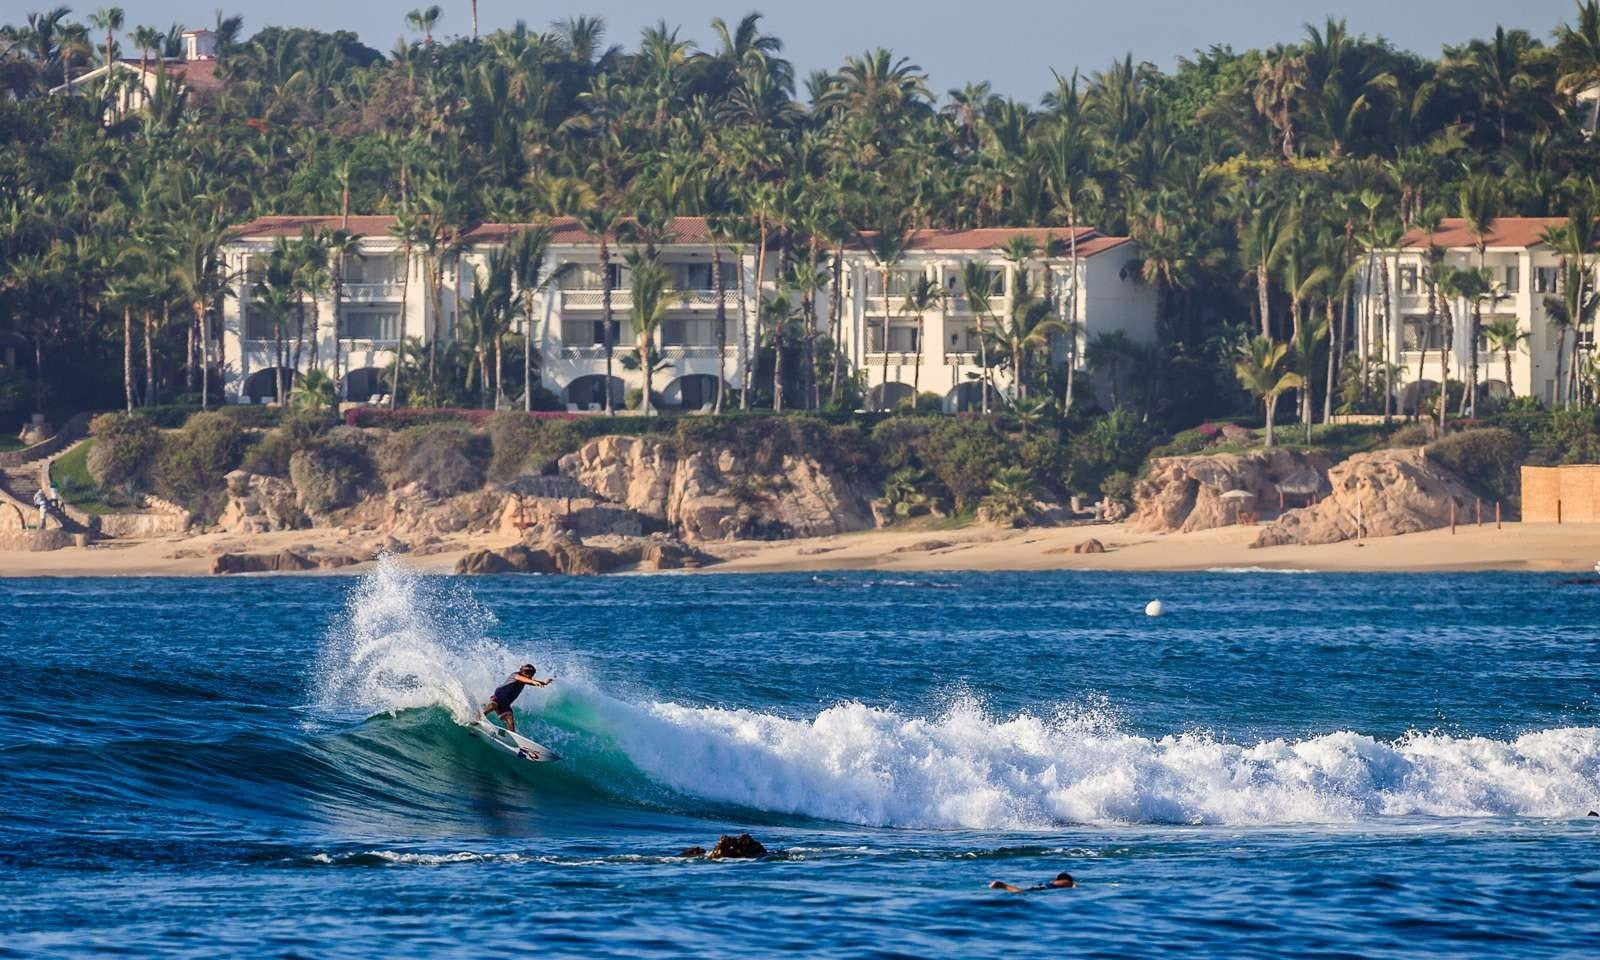 Lake Surf Report, One and Only Palmilla, Los Cabos, Mexico